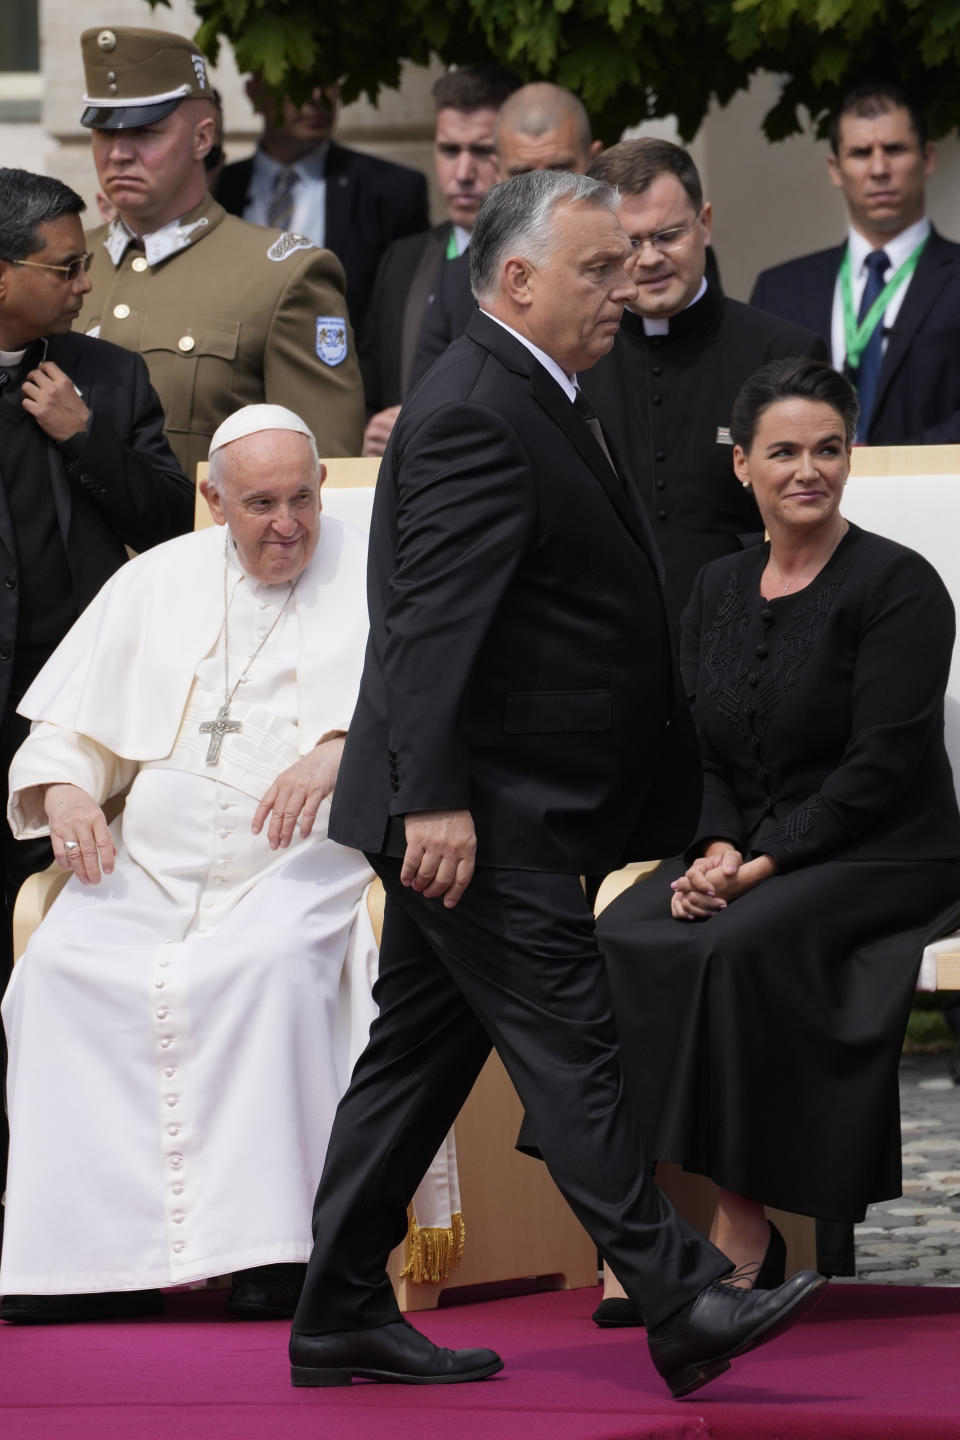 Hungary Prime Minister Viktor Orban, center, walks past Pope Francis and Hungary President Katalin Novák in the square of "Sándor" Palace in Budapest, Friday, April 28, 2023. The Pontiff is in Hungary for a three-day pastoral visit. (AP Photo/Andrew Medichini)